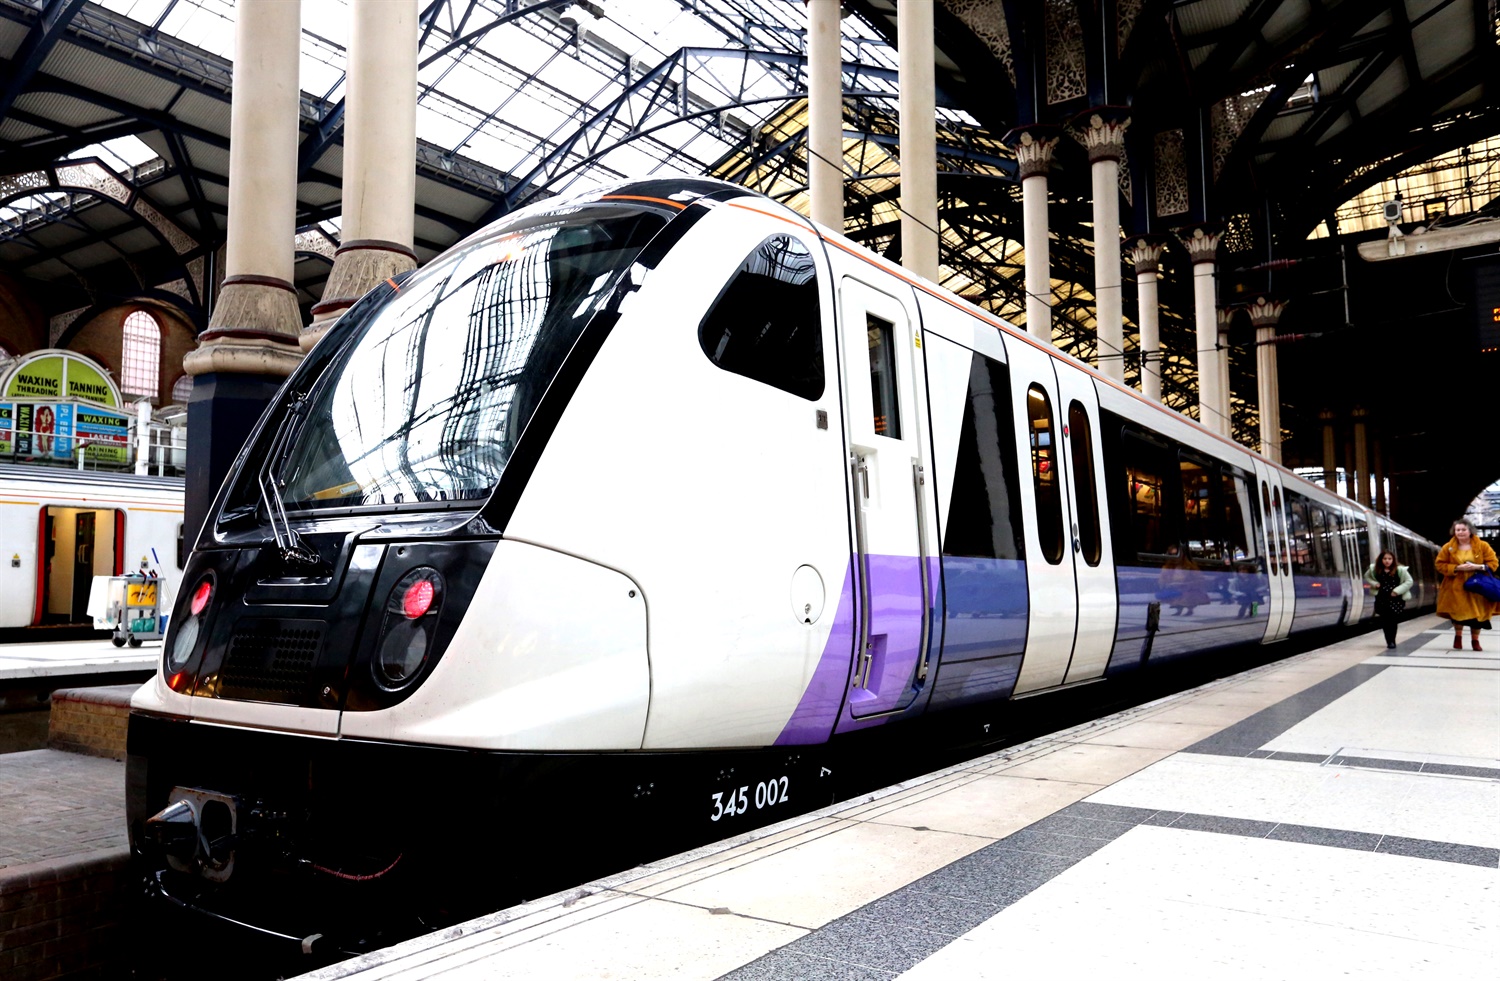 First Elizabeth Line train on track to enter service in May